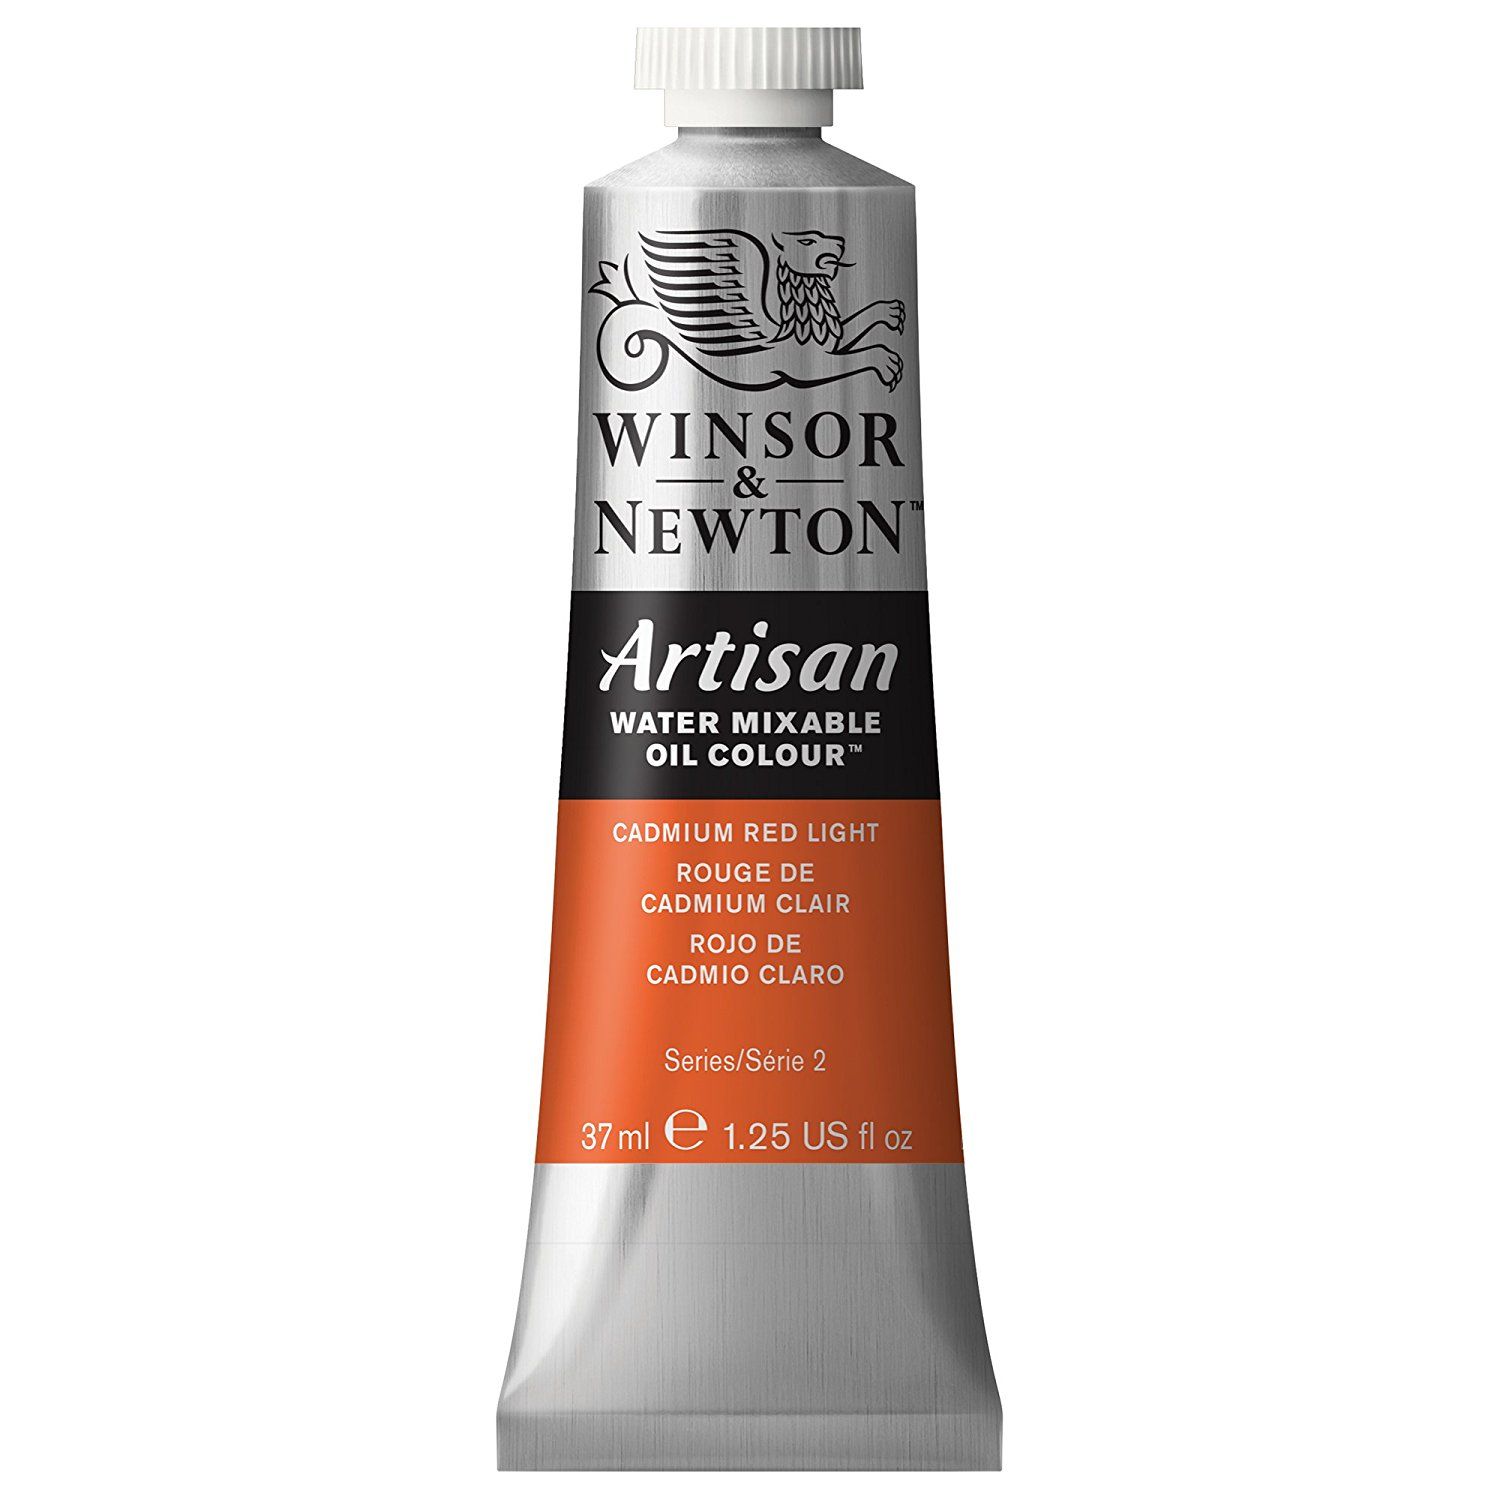 Artisan Water Mixable Oil- Cadmium Red Light 37ml